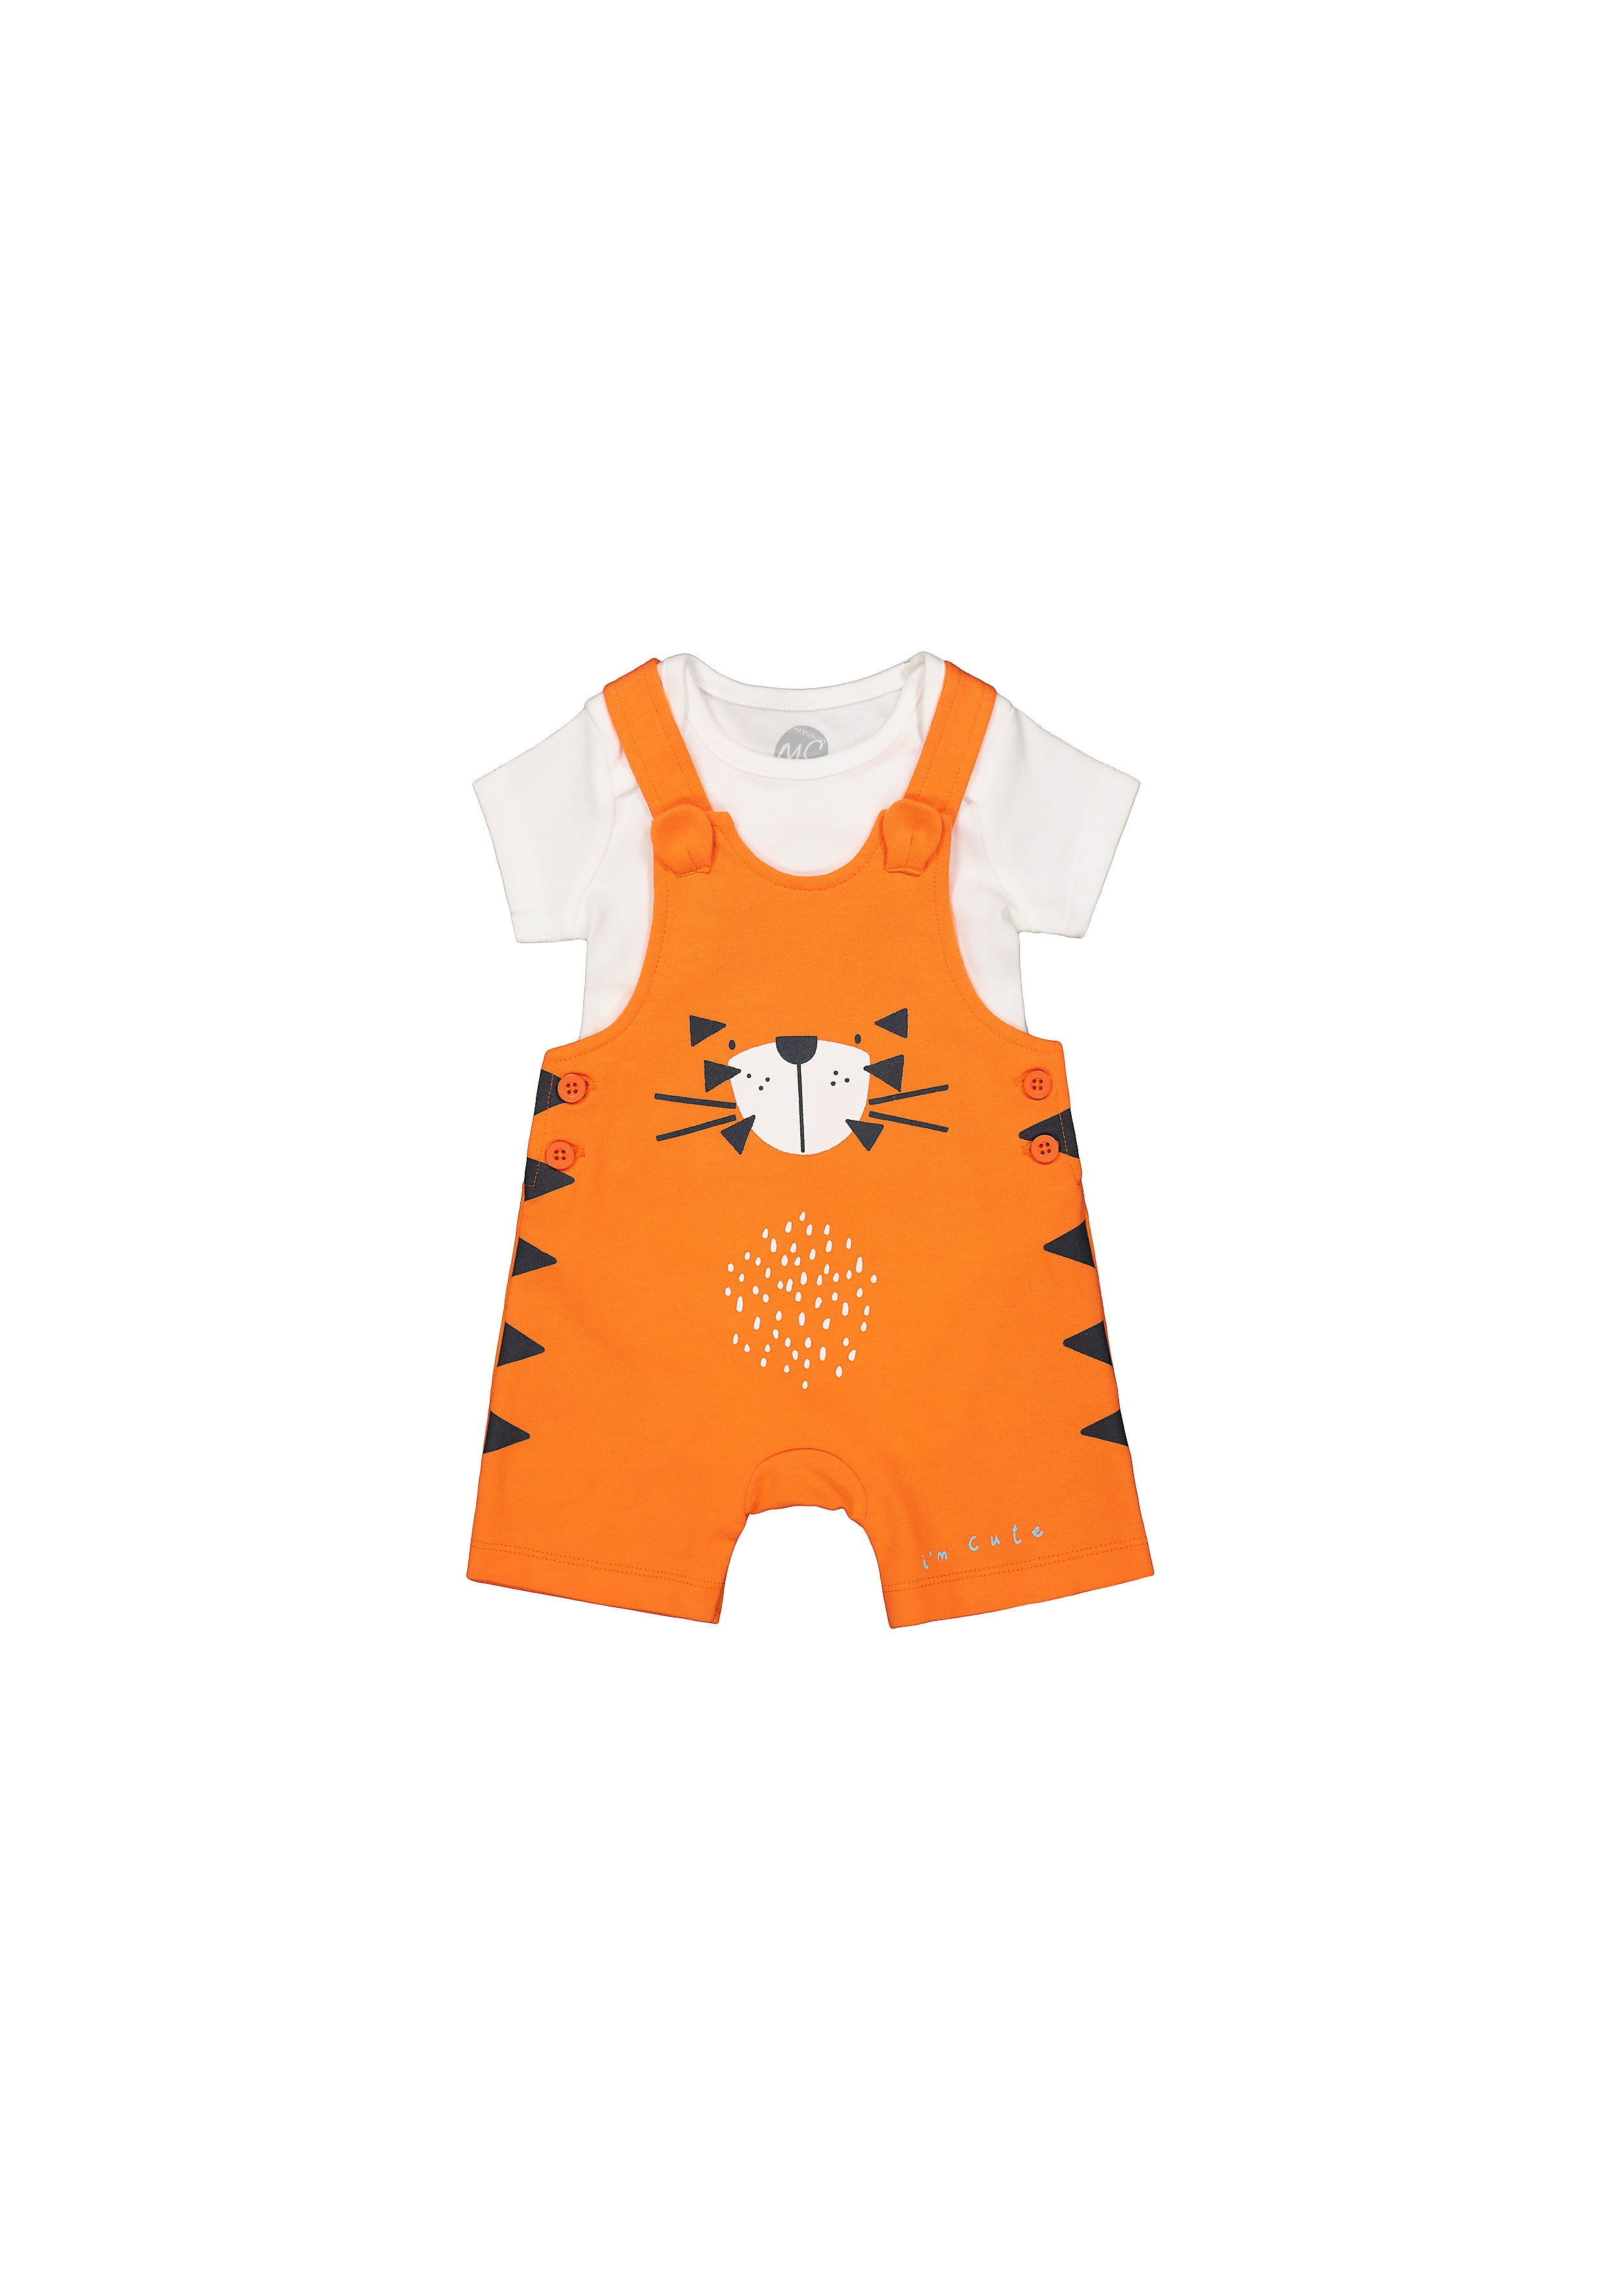 Mothercare | Boys Half Sleeves Dungaree Set Tiger Print With 3D Ears - Orange White